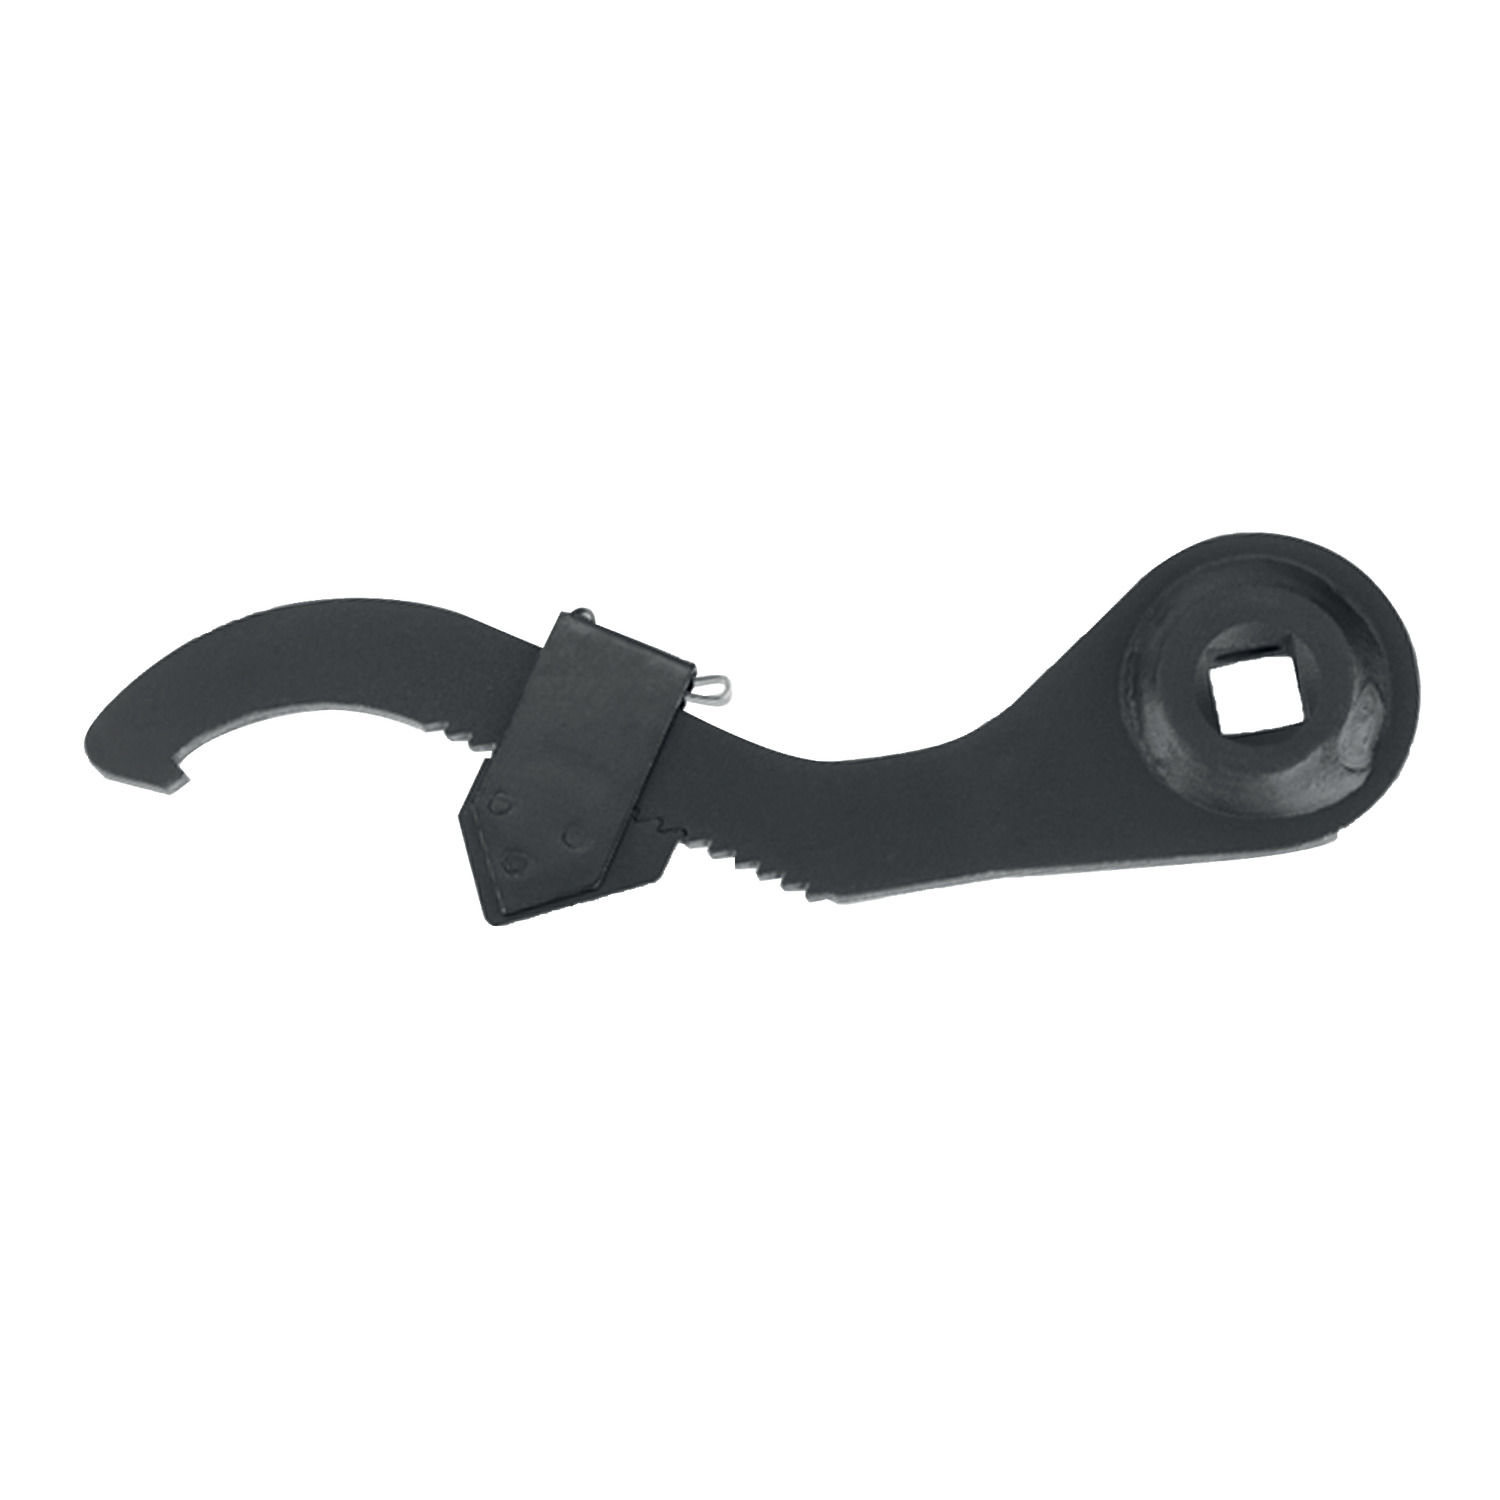 Product 95105, Adjustable Hook Spanner with hook nose - for use with torque wrench / 